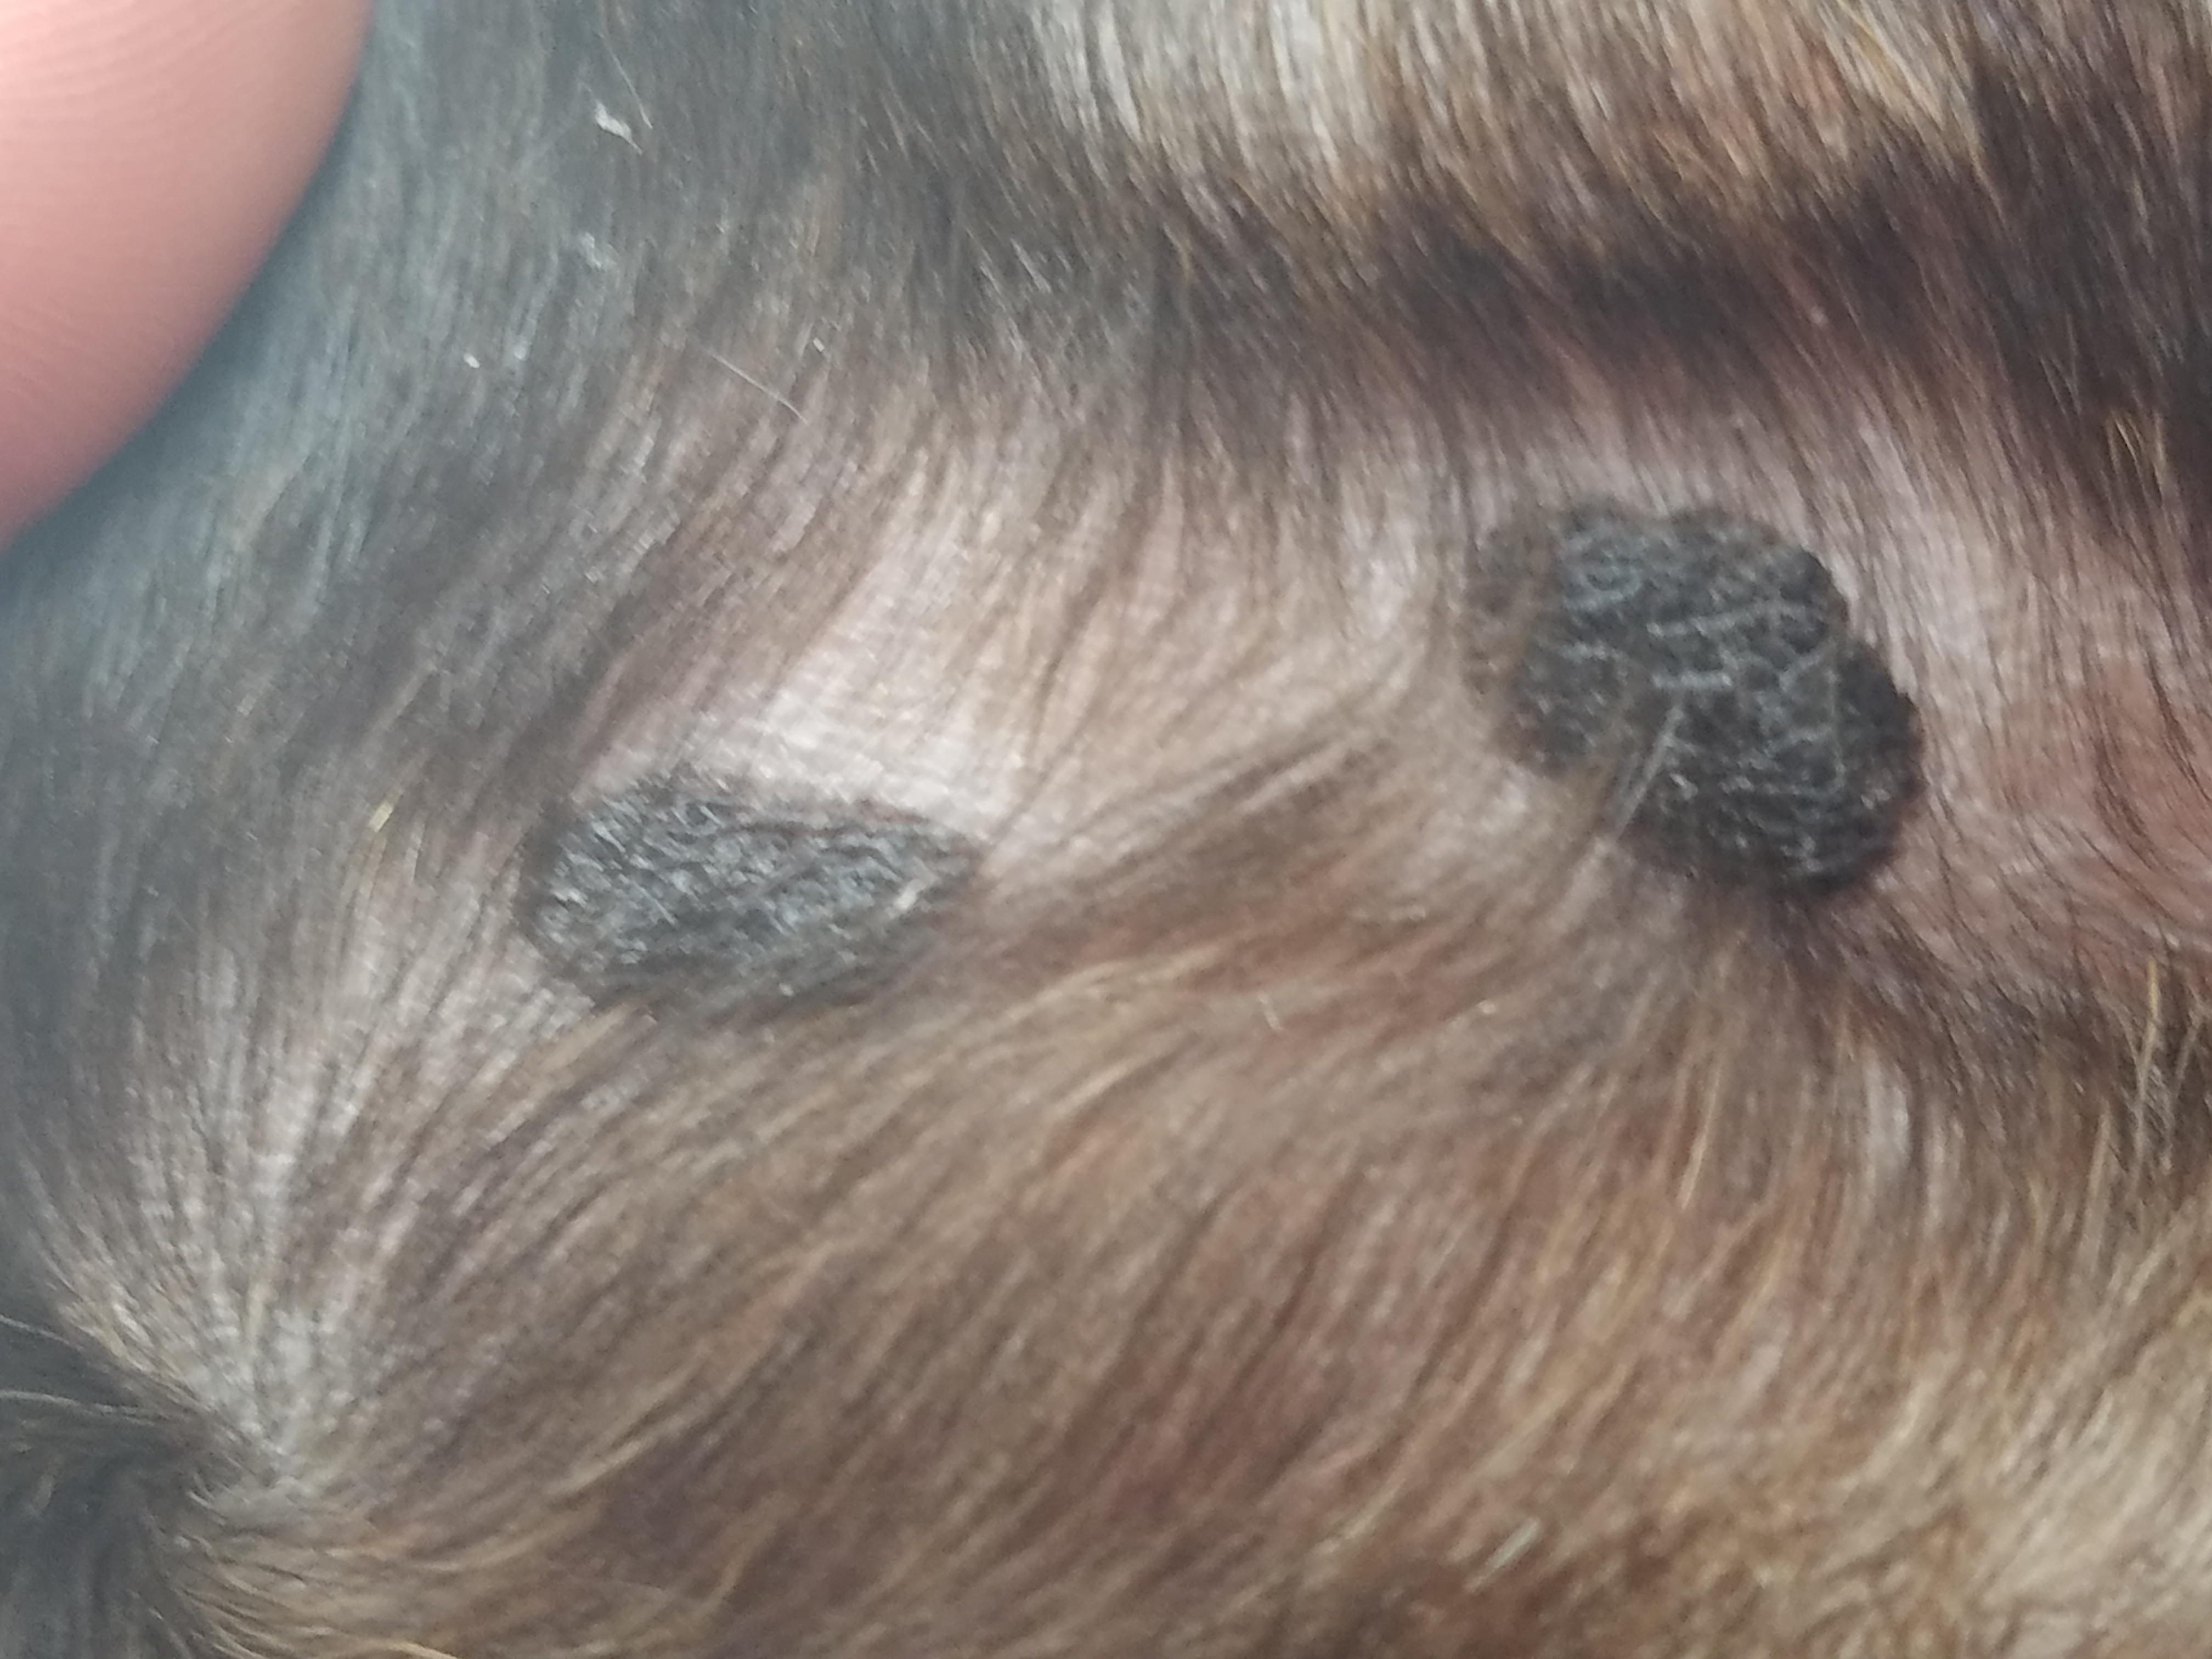 What Does Melanoma Look Like On Dogs